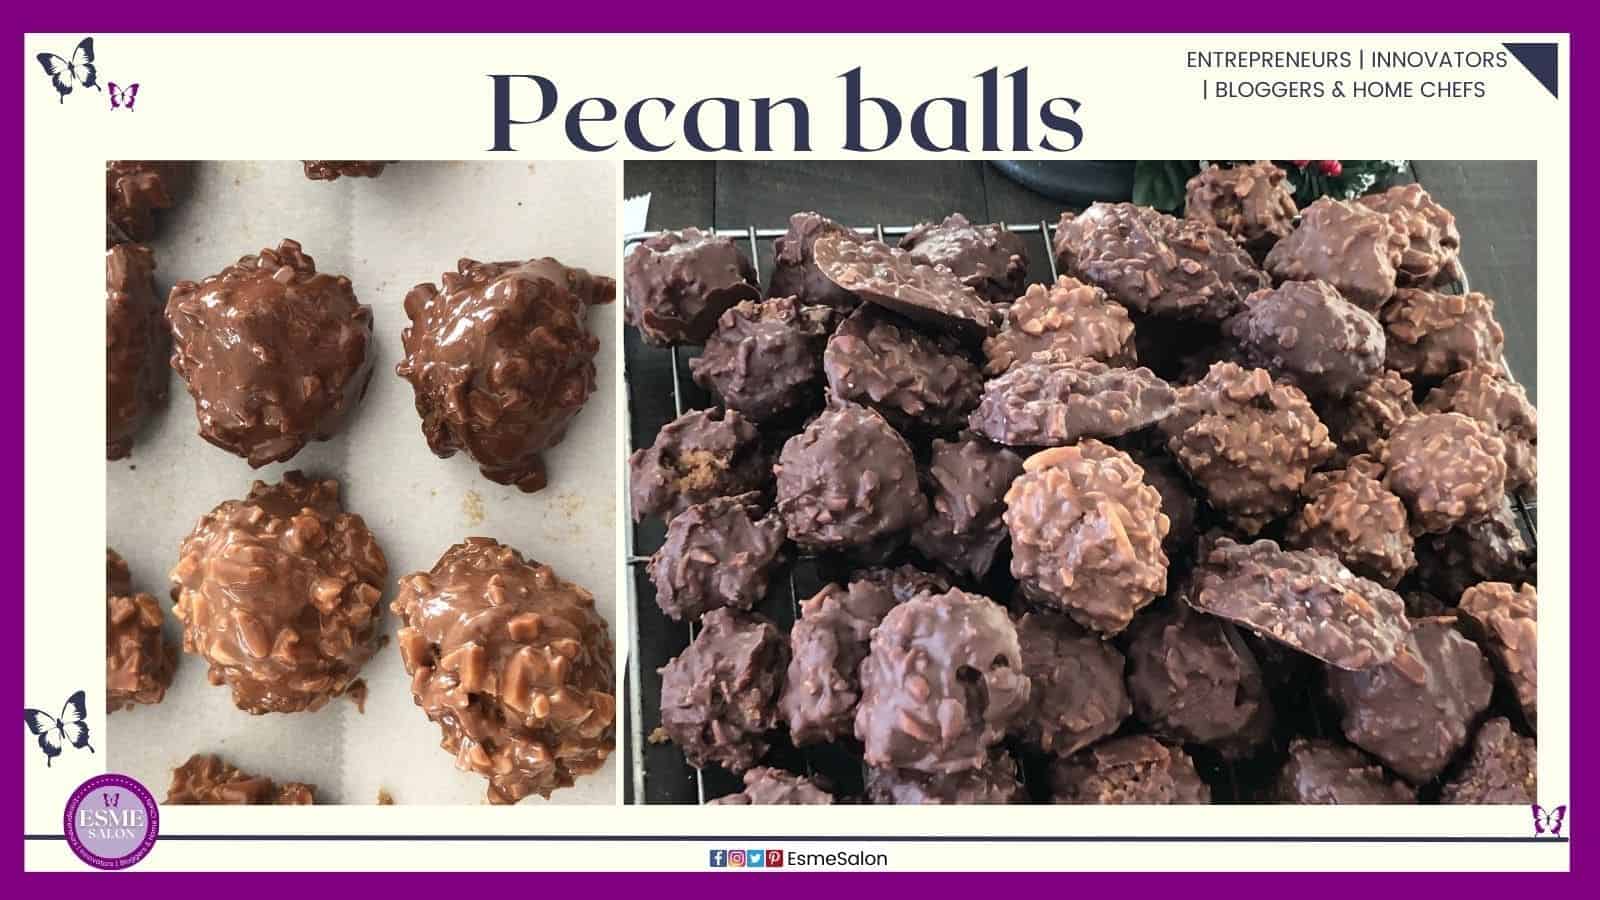 an image of round Pecan balls covered in chocolate